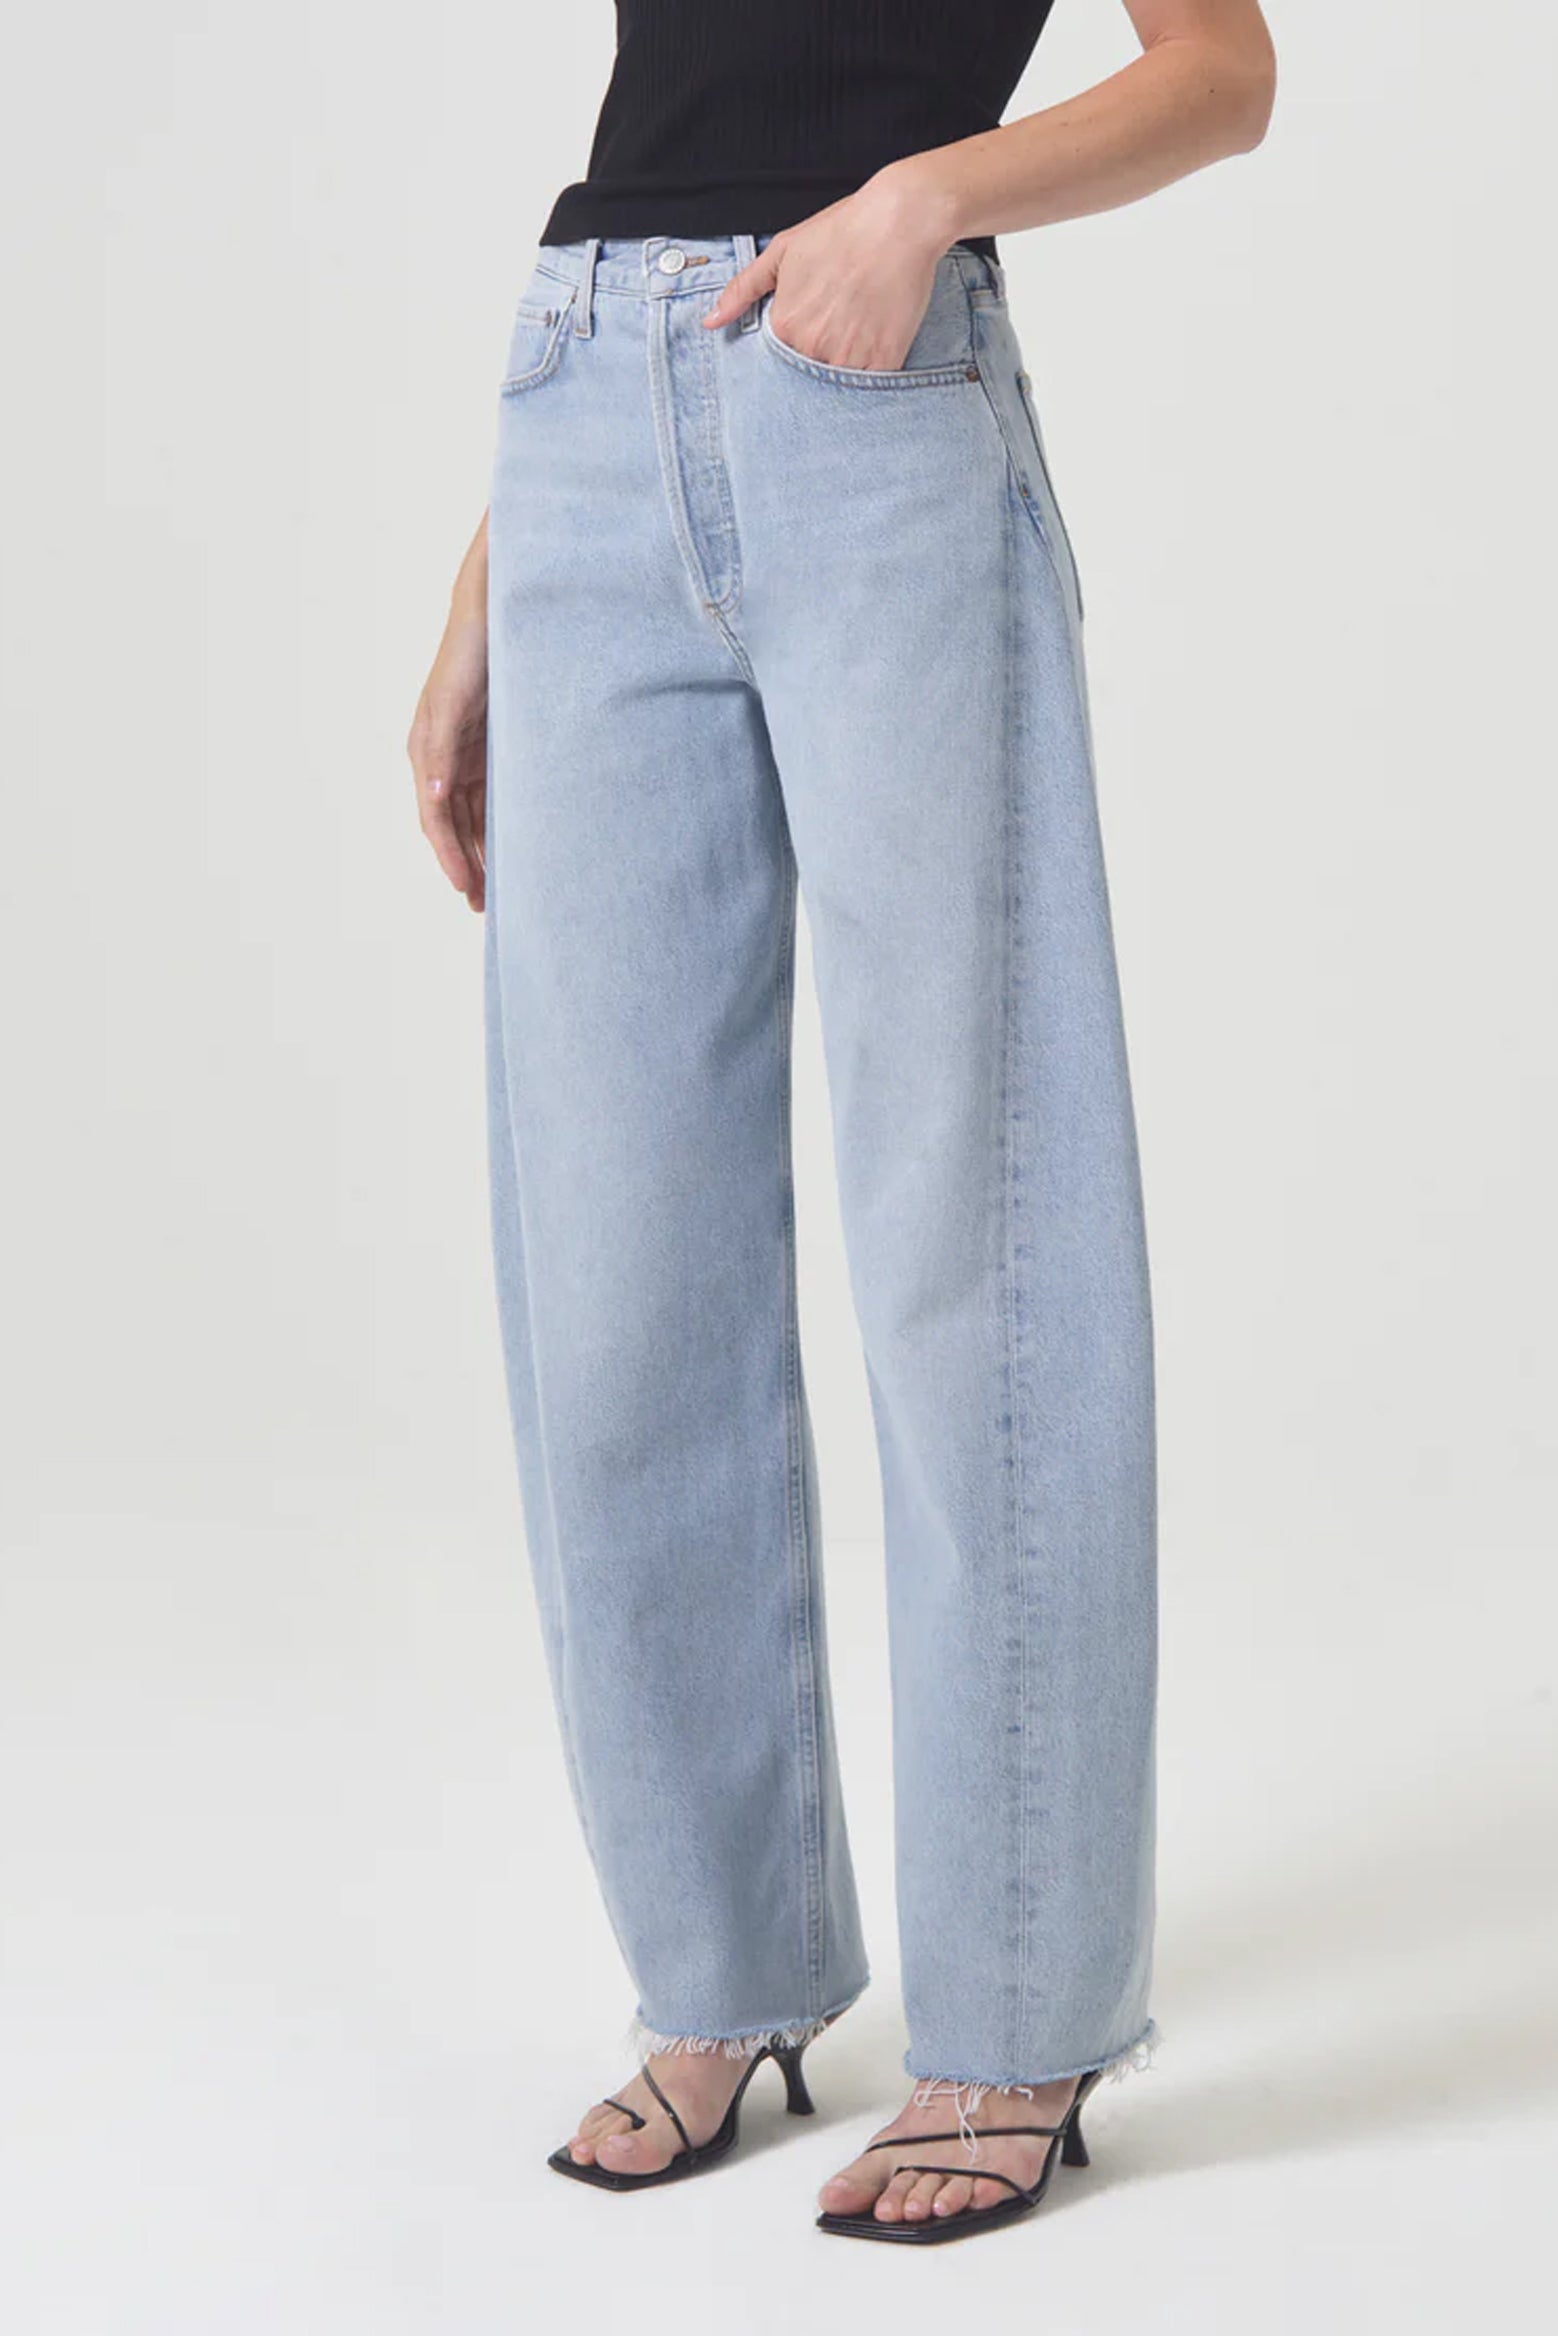 Agolde High Rise Pieced Jean in Void available at The New Trend Australia.